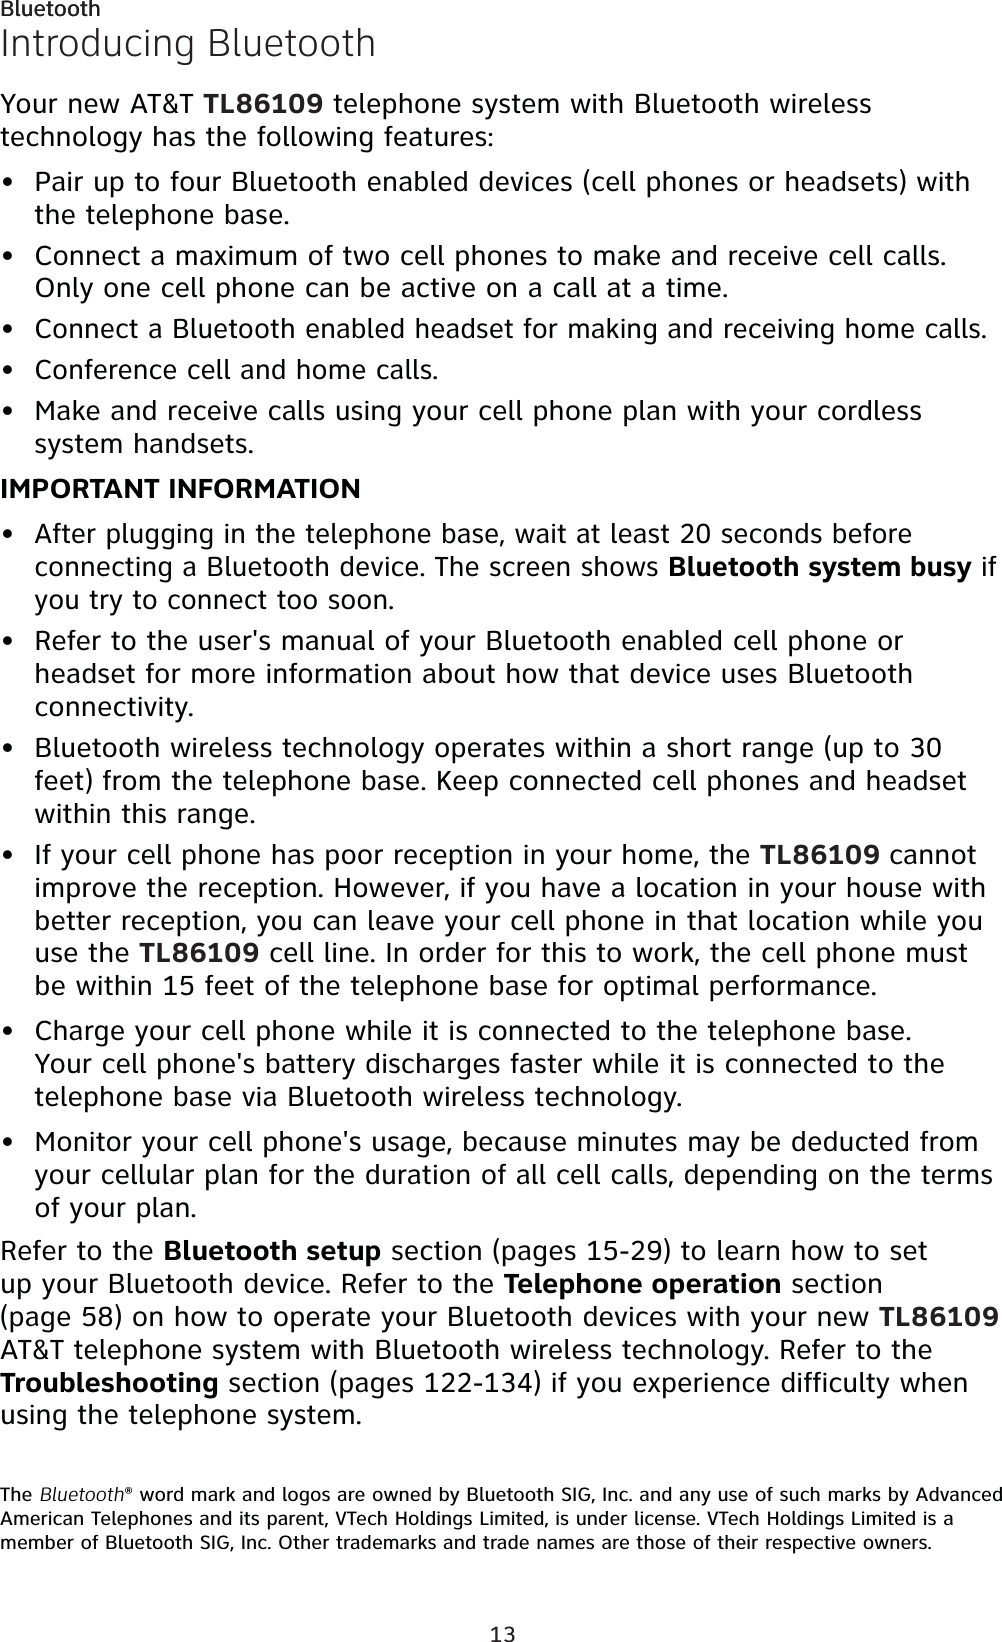 13BluetoothIntroducing BluetoothYour new AT&amp;T TL86109 telephone system with Bluetooth wireless technology has the following features:Pair up to four Bluetooth enabled devices (cell phones or headsets) with the telephone base.Connect a maximum of two cell phones to make and receive cell calls. Only one cell phone can be active on a call at a time.Connect a Bluetooth enabled headset for making and receiving home calls.Conference cell and home calls.Make and receive calls using your cell phone plan with your cordless system handsets. IMPORTANT INFORMATIONAfter plugging in the telephone base, wait at least 20 seconds before connecting a Bluetooth device. The screen shows Bluetooth system busy if you try to connect too soon.Refer to the user&apos;s manual of your Bluetooth enabled cell phone or headset for more information about how that device uses Bluetooth connectivity.Bluetooth wireless technology operates within a short range (up to 30 feet) from the telephone base. Keep connected cell phones and headset within this range.If your cell phone has poor reception in your home, the TL86109 cannotimprove the reception. However, if you have a location in your house with better reception, you can leave your cell phone in that location while you use the TL86109 cell line. In order for this to work, the cell phone must be within 15 feet of the telephone base for optimal performance.Charge your cell phone while it is connected to the telephone base. Your cell phone&apos;s battery discharges faster while it is connected to the telephone base via Bluetooth wireless technology.Monitor your cell phone&apos;s usage, because minutes may be deducted from your cellular plan for the duration of all cell calls, depending on the terms of your plan.Refer to the Bluetooth setup section (pages 15-29) to learn how to set up your Bluetooth device. Refer to the Telephone operation section (page 58) on how to operate your Bluetooth devices with your new TL86109AT&amp;T telephone system with Bluetooth wireless technology. Refer to the Troubleshooting section (pages 122-134) if you experience difficulty when using the telephone system.The Bluetooth® word mark and logos are owned by Bluetooth SIG, Inc. and any use of such marks by Advanced American Telephones and its parent, VTech Holdings Limited, is under license. VTech Holdings Limited is a member of Bluetooth SIG, Inc. Other trademarks and trade names are those of their respective owners.•••••••••••Bluetooth